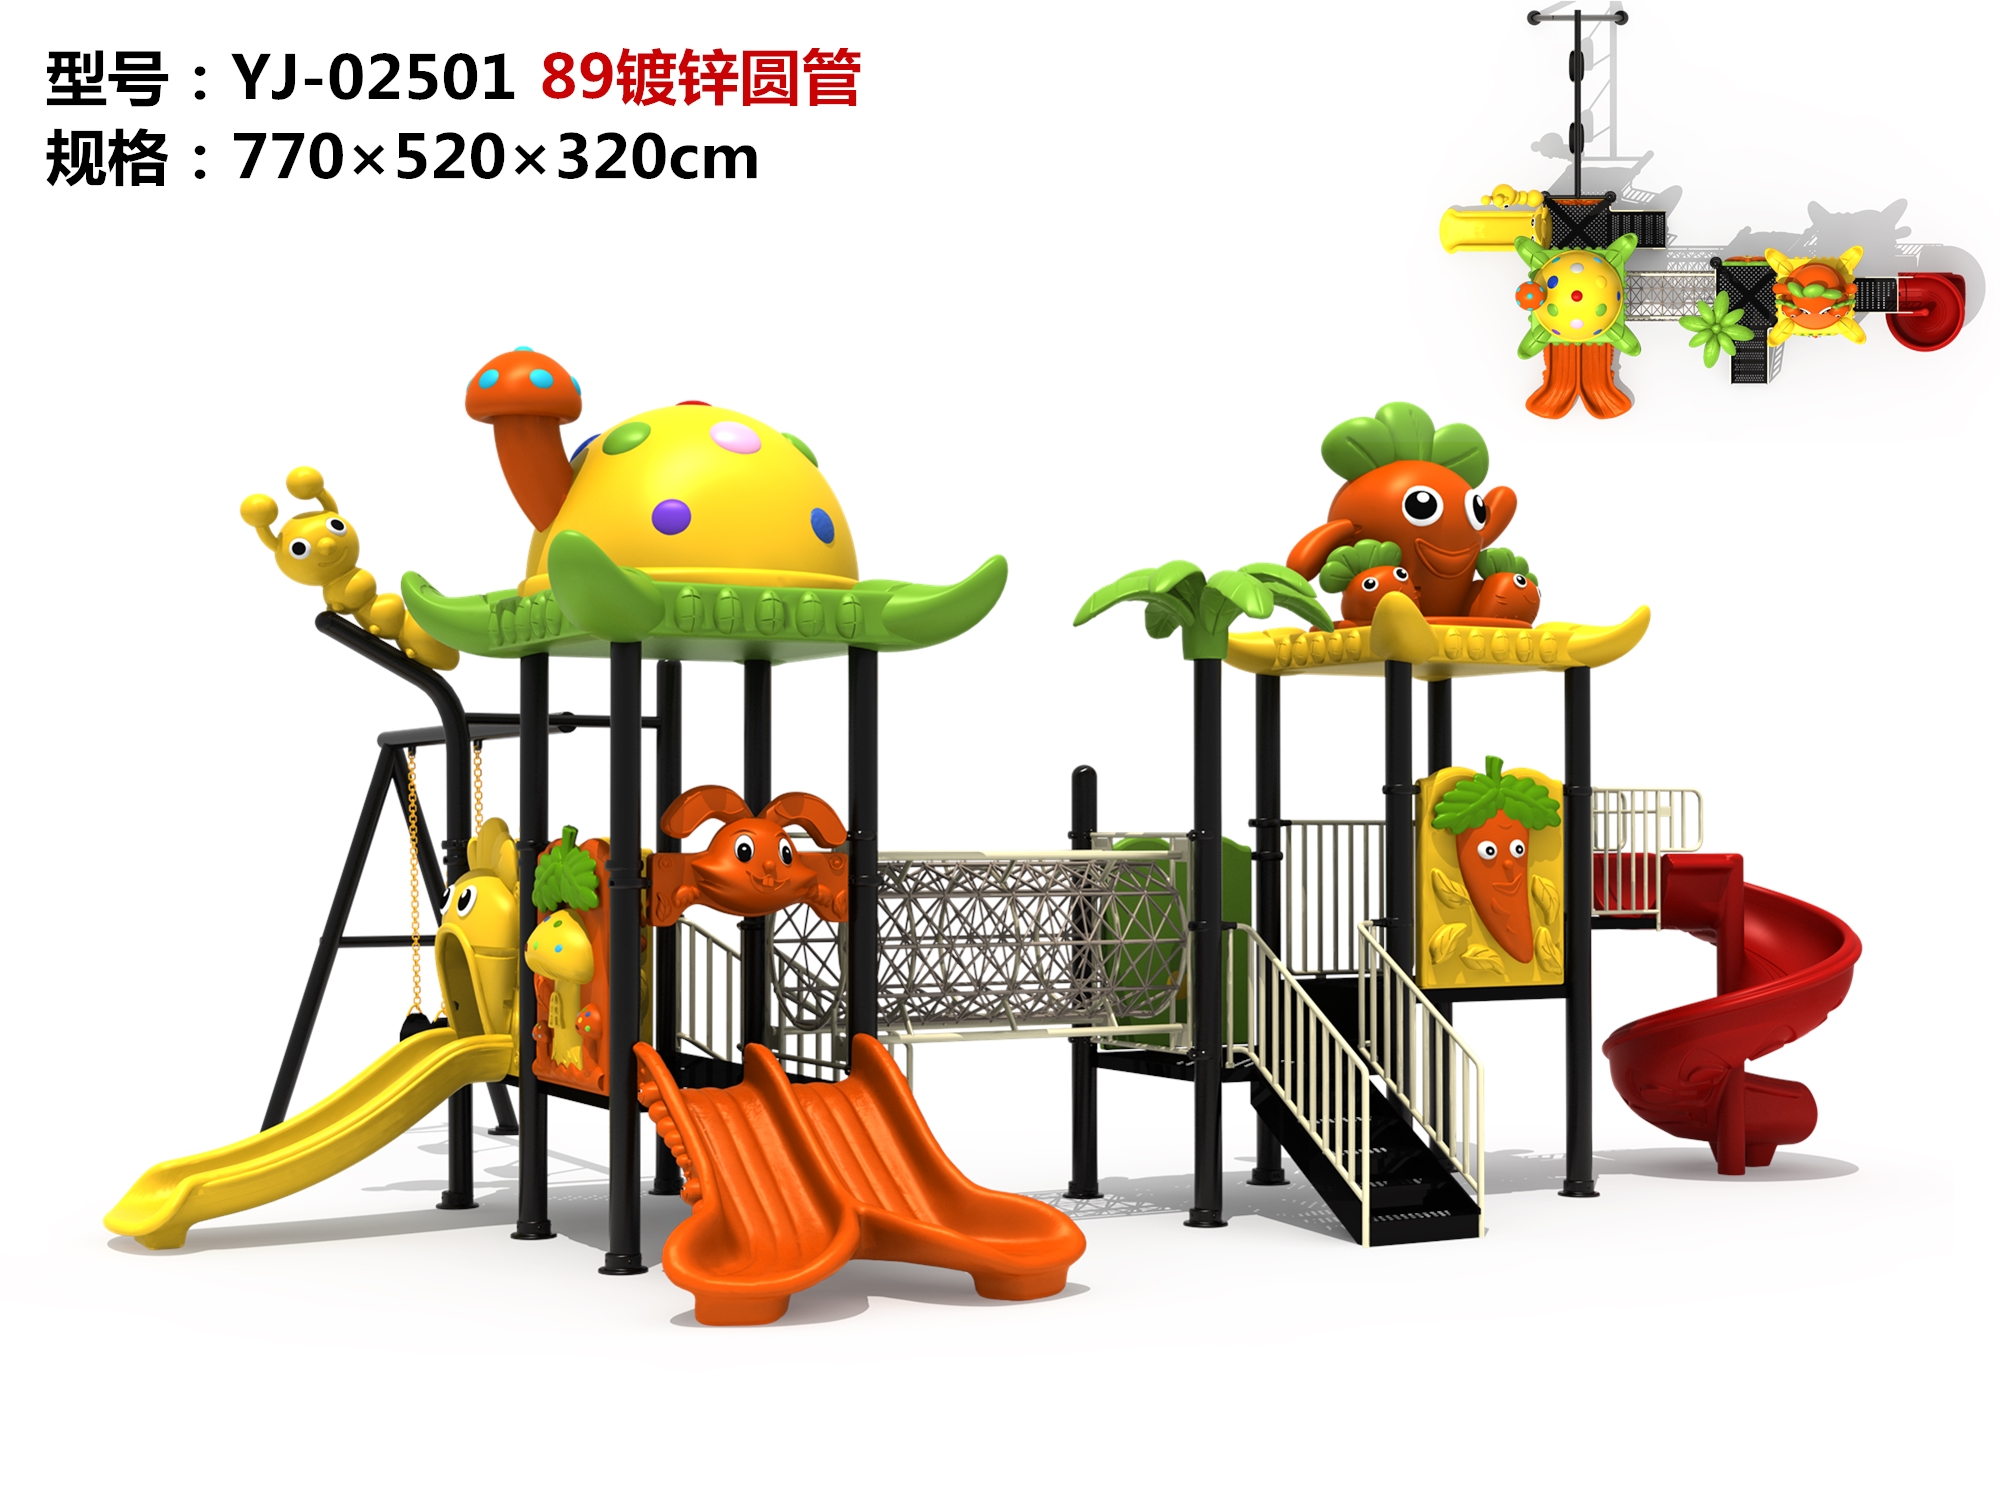 OL-MH02501Outdoor playsets set kits baby